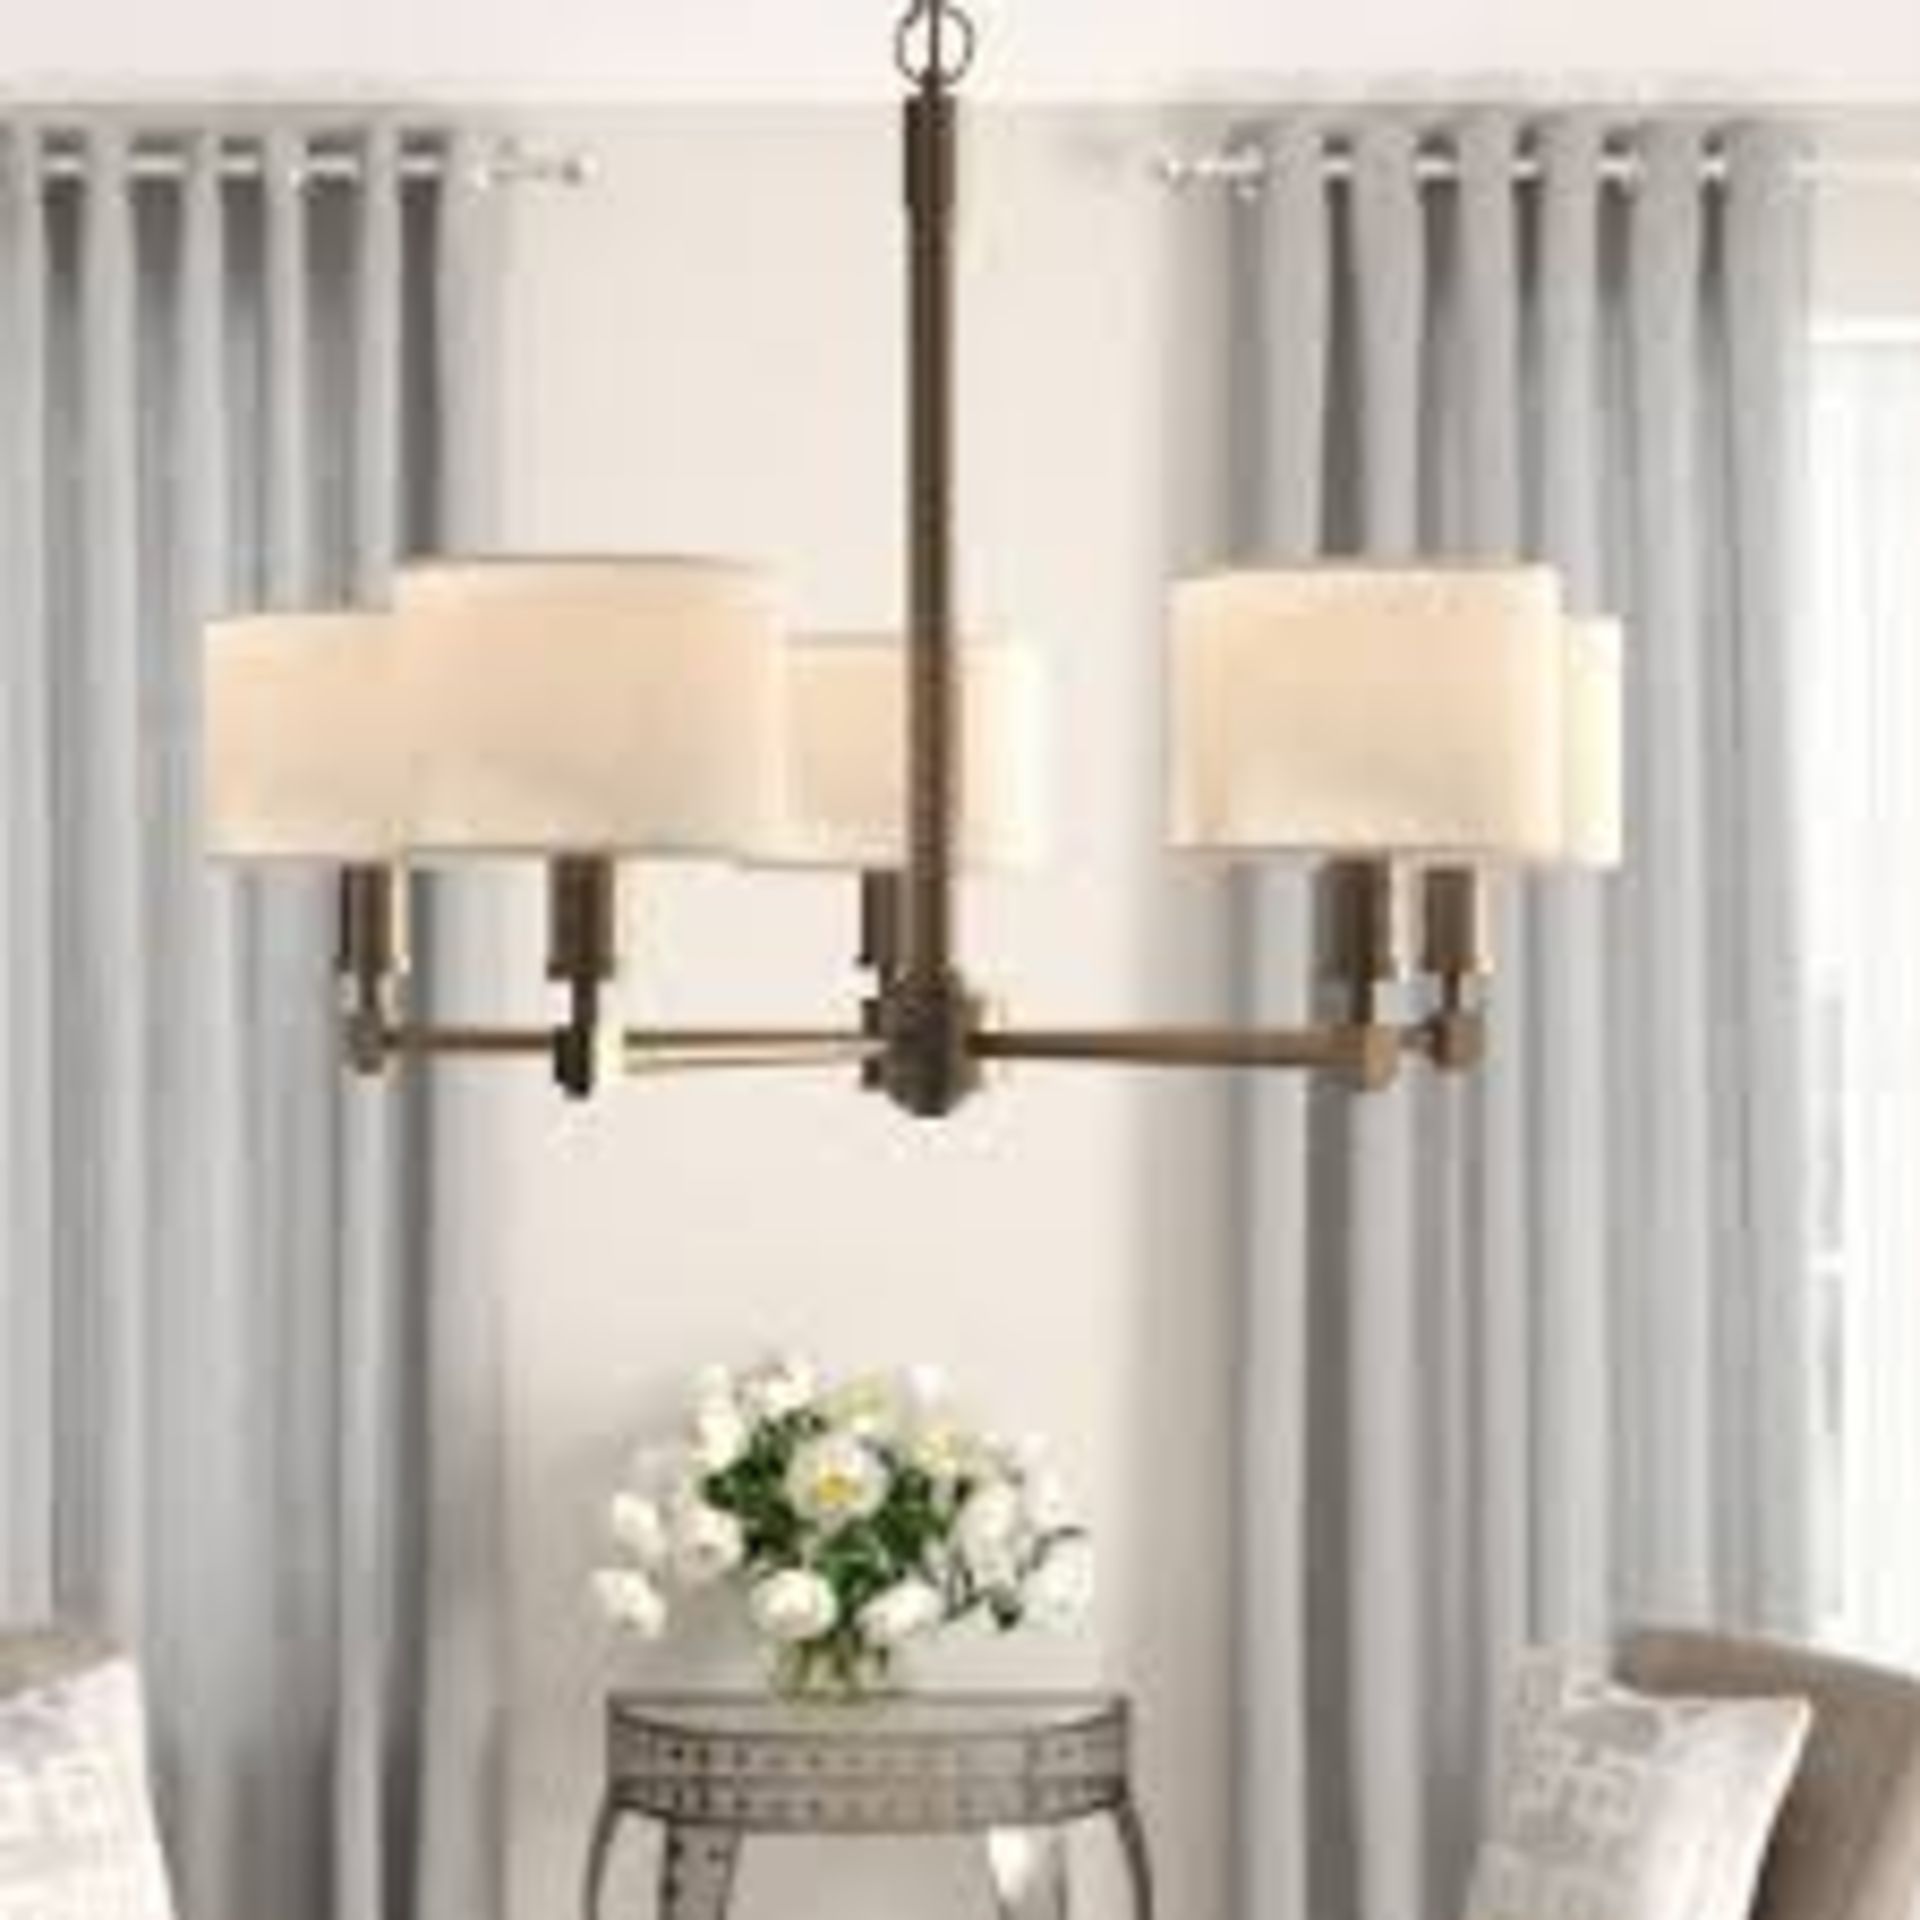 Boxed Renderos 5 Light Shaded Chandelier RRP £185 (16875) (Appraisals Are Available Upon Request) (